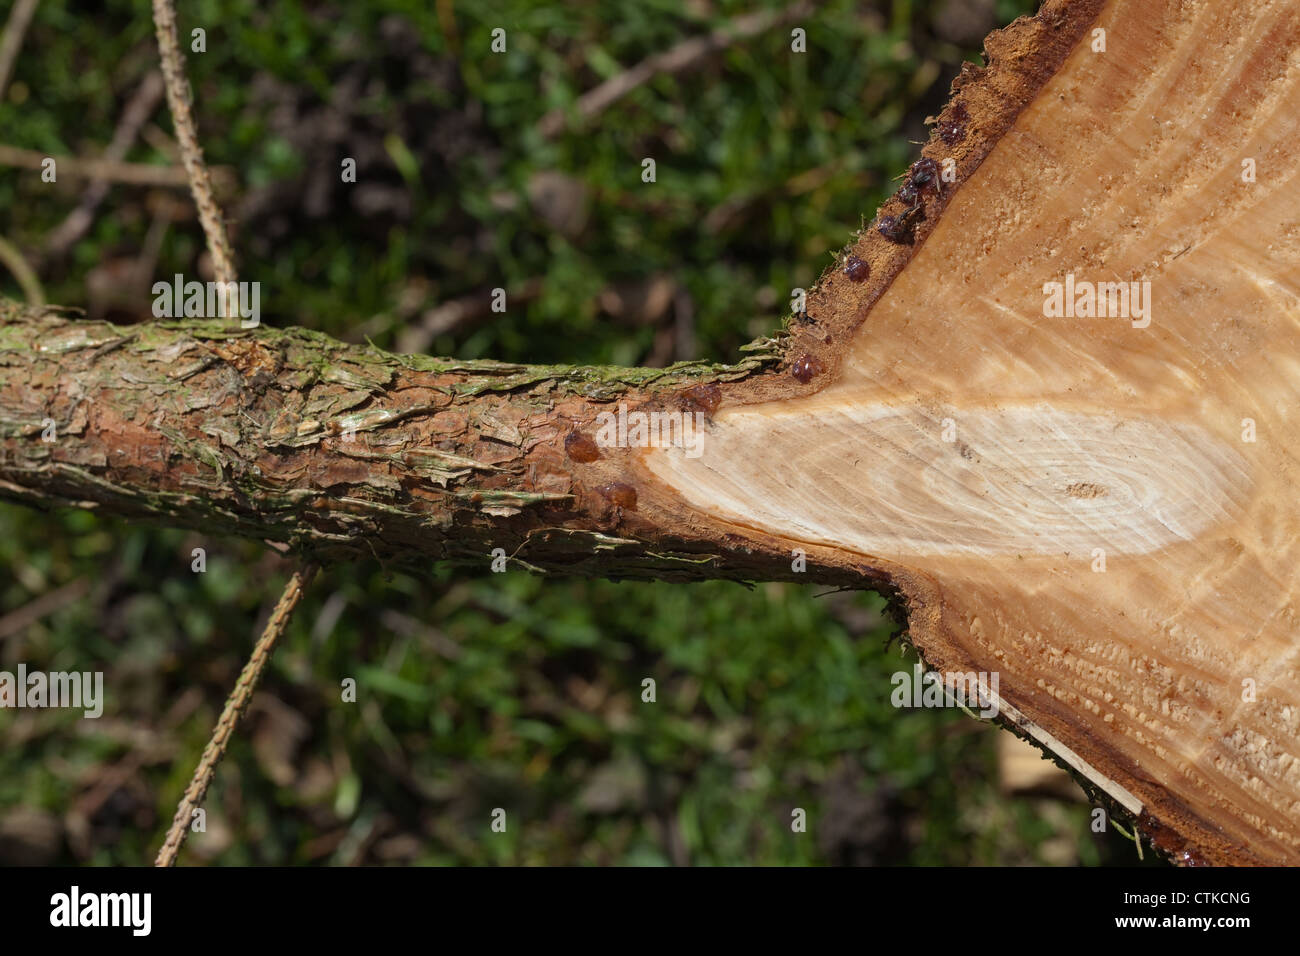 Norway Spruce (Picea abies). Piece of trunk cross-section. Showing side branch originating from trunk and how a knot is revealed Stock Photo